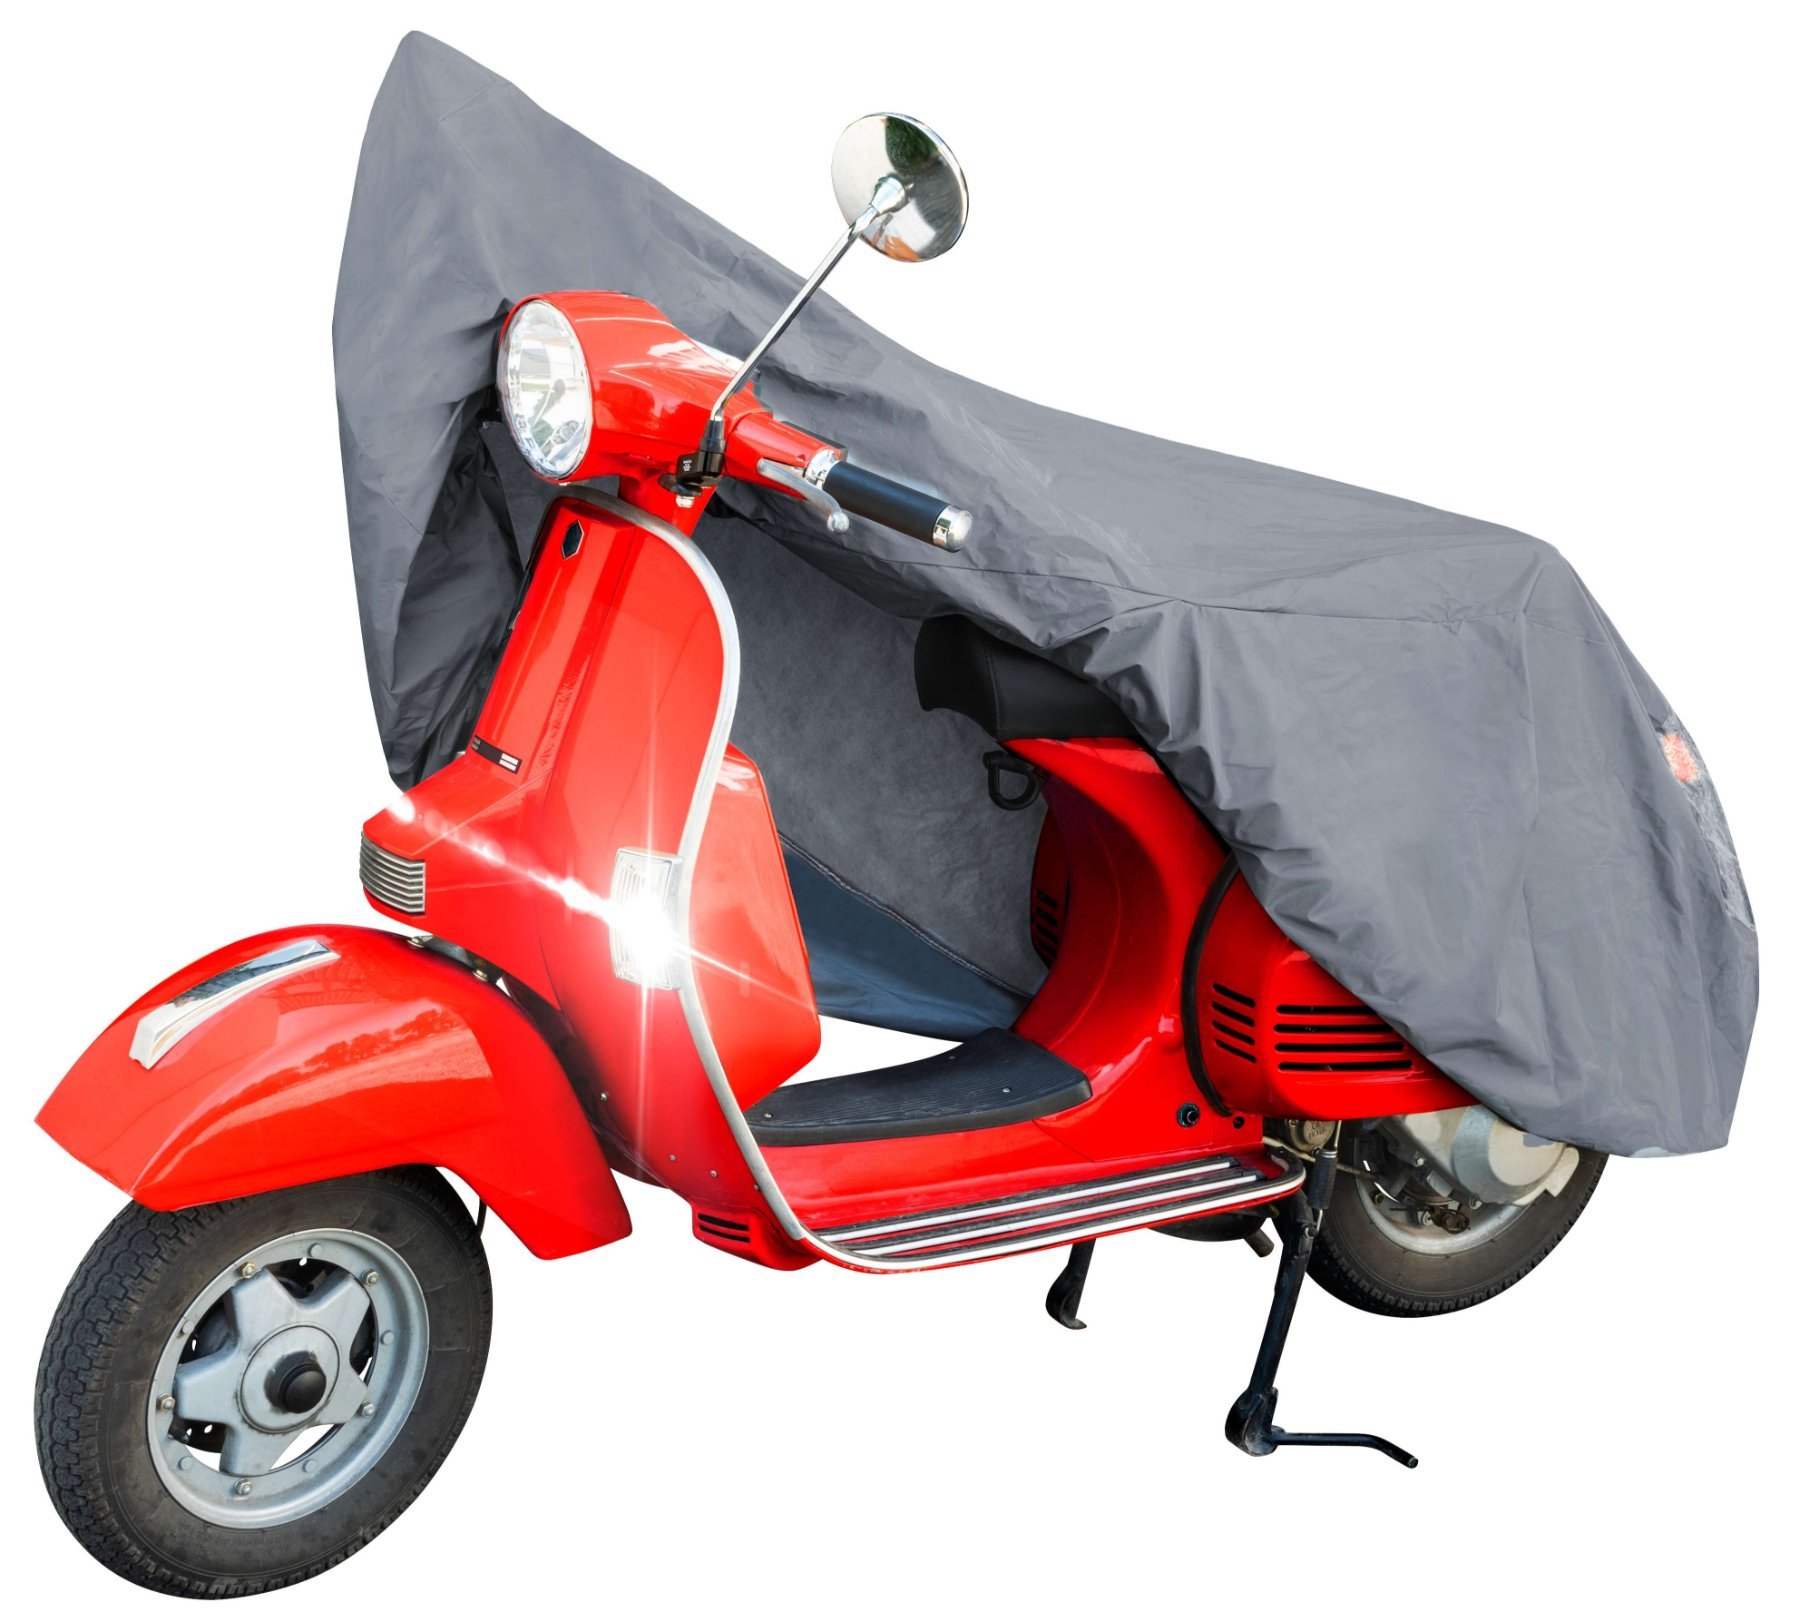 Motorcycle garage Scooter size S PVC - 185 x 90 x 110 cm grey